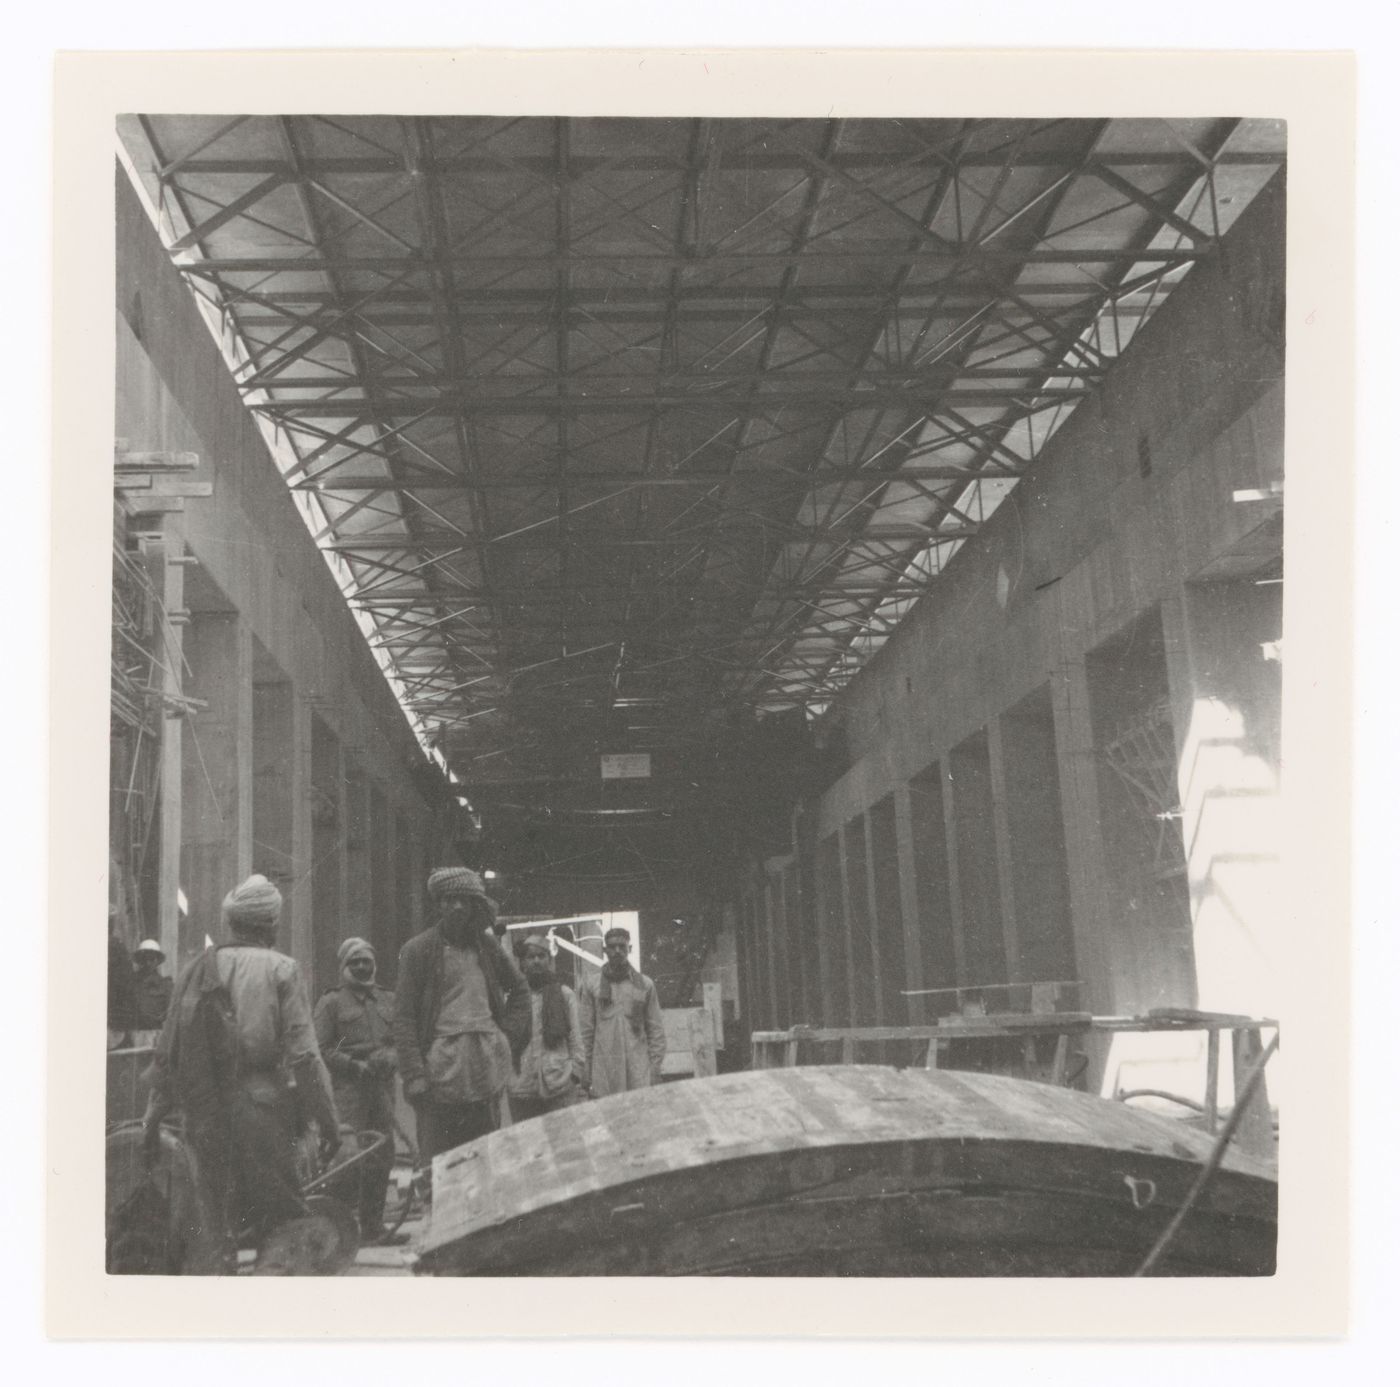 Interior view of an unidentified building under construction with workers, possibly in Chandigarh, India